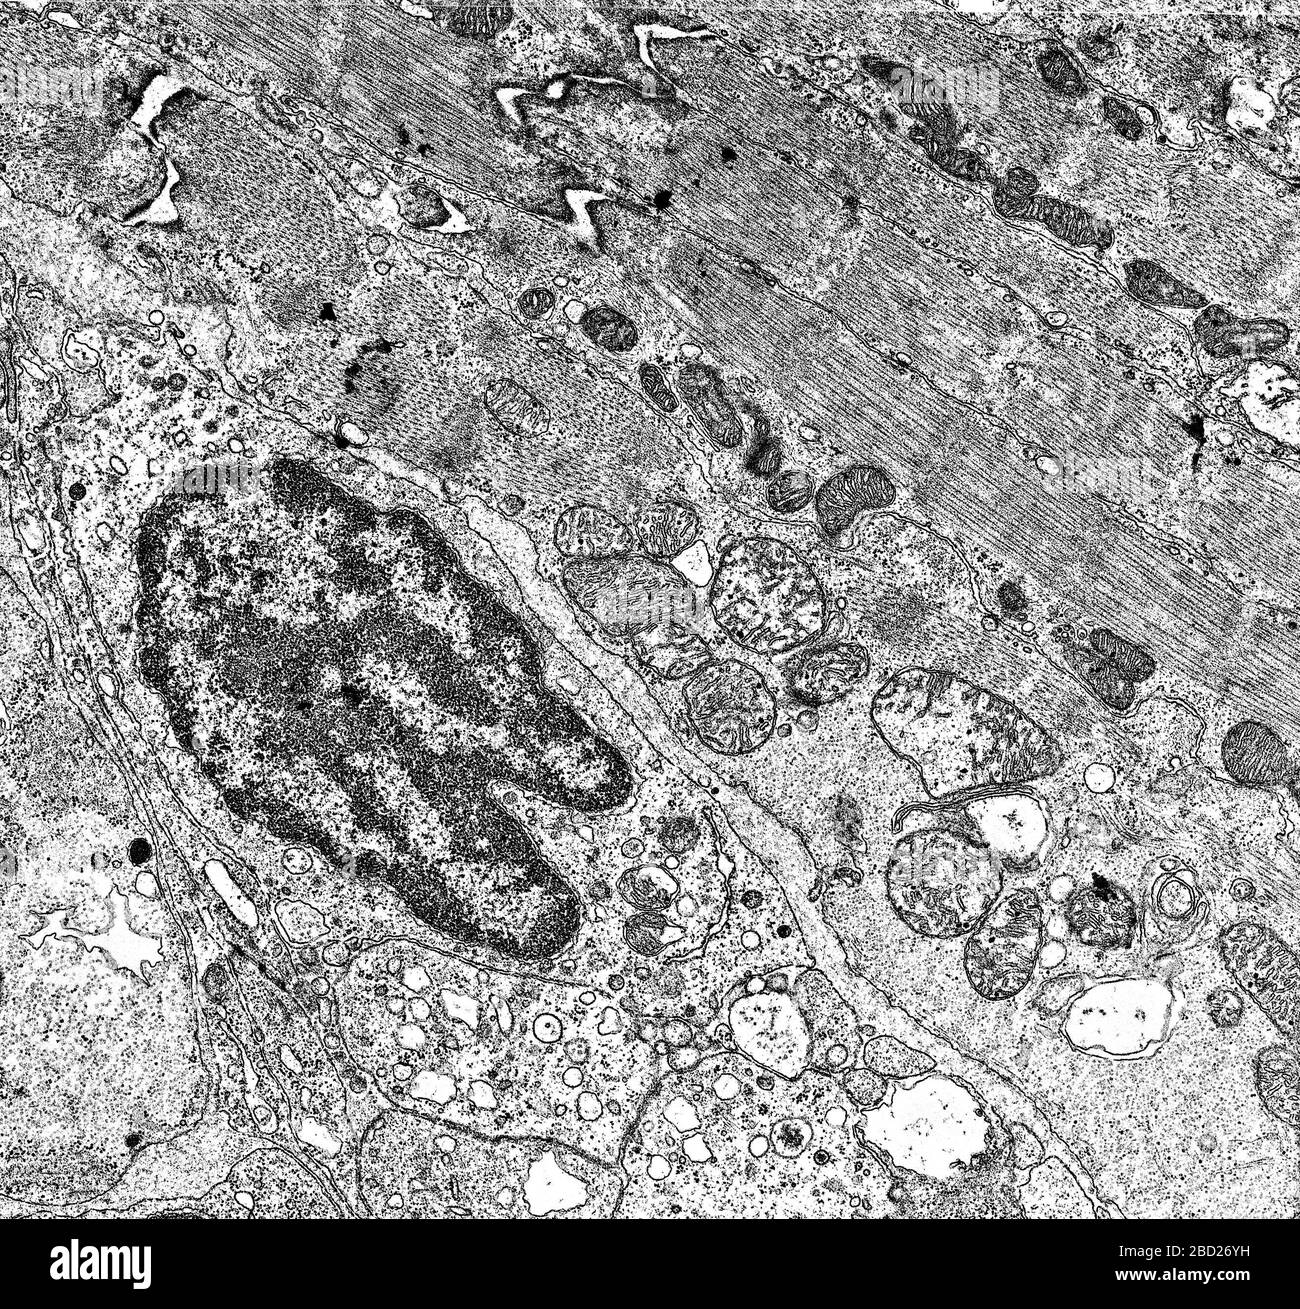 Cell nucleus and organelles under the electron microscope 50,000x Stock  Photo - Alamy